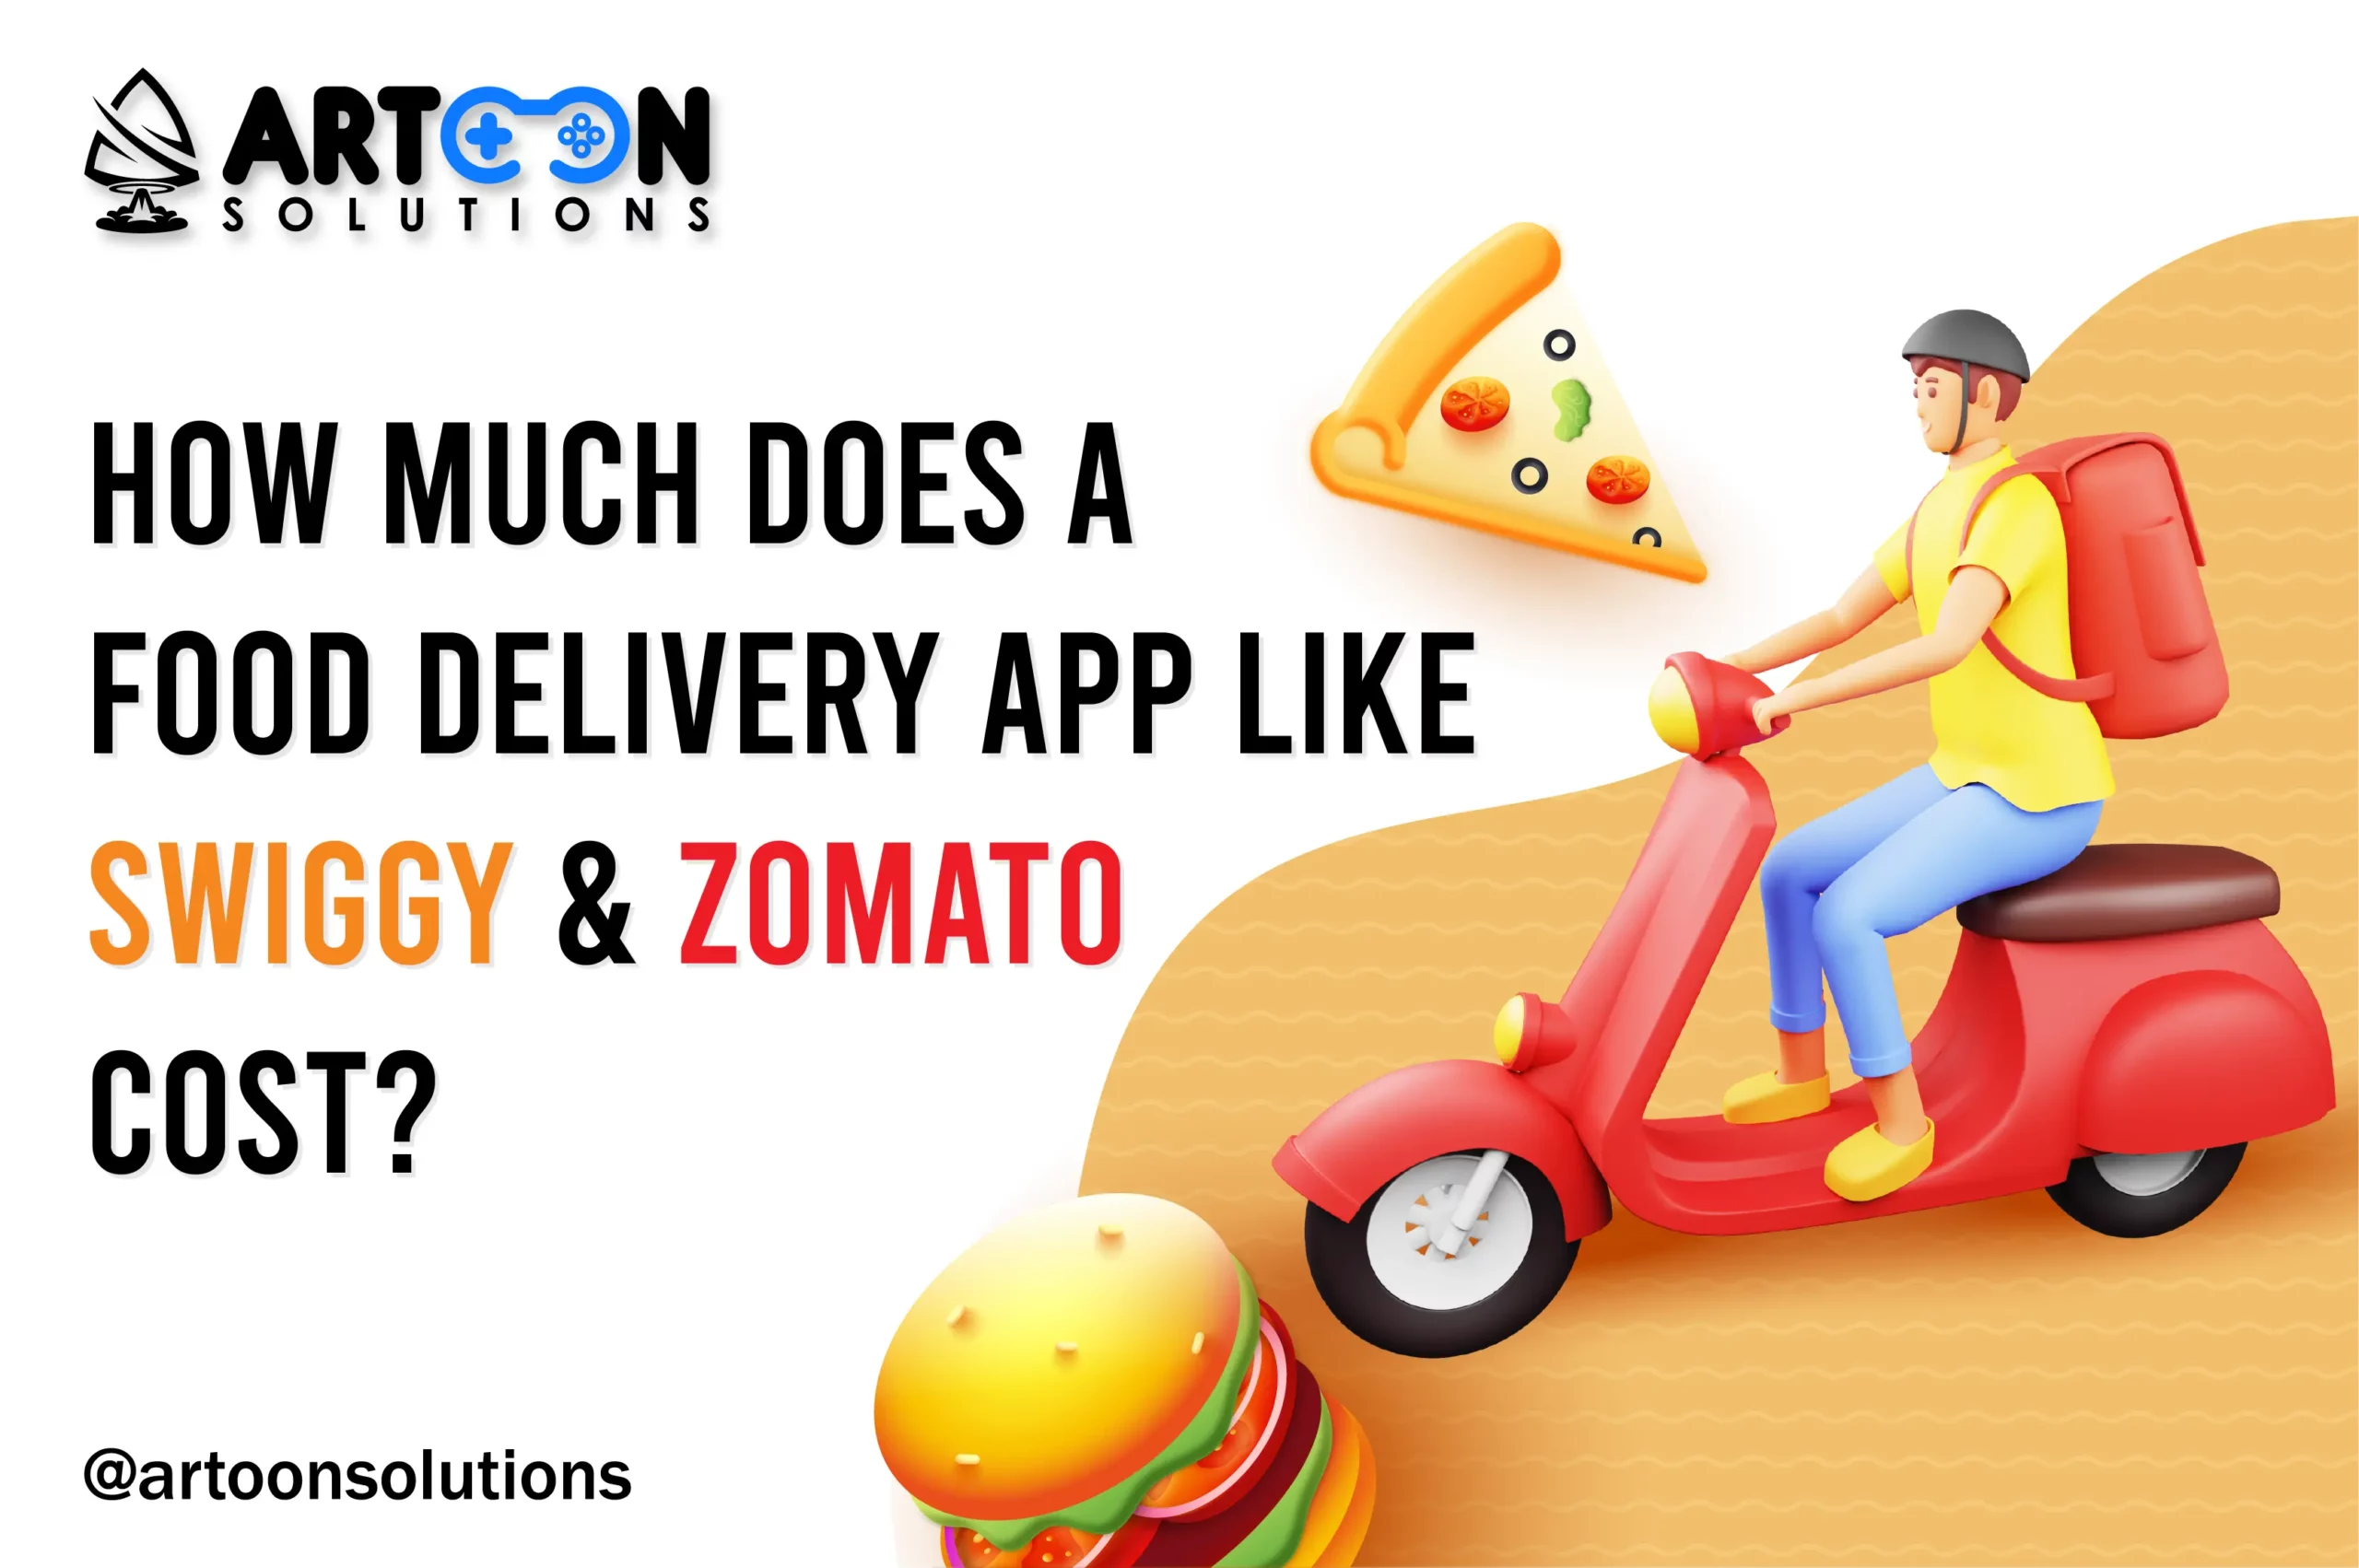 How Much Does a Food Delivery App like Swiggy & Zomato Cost?